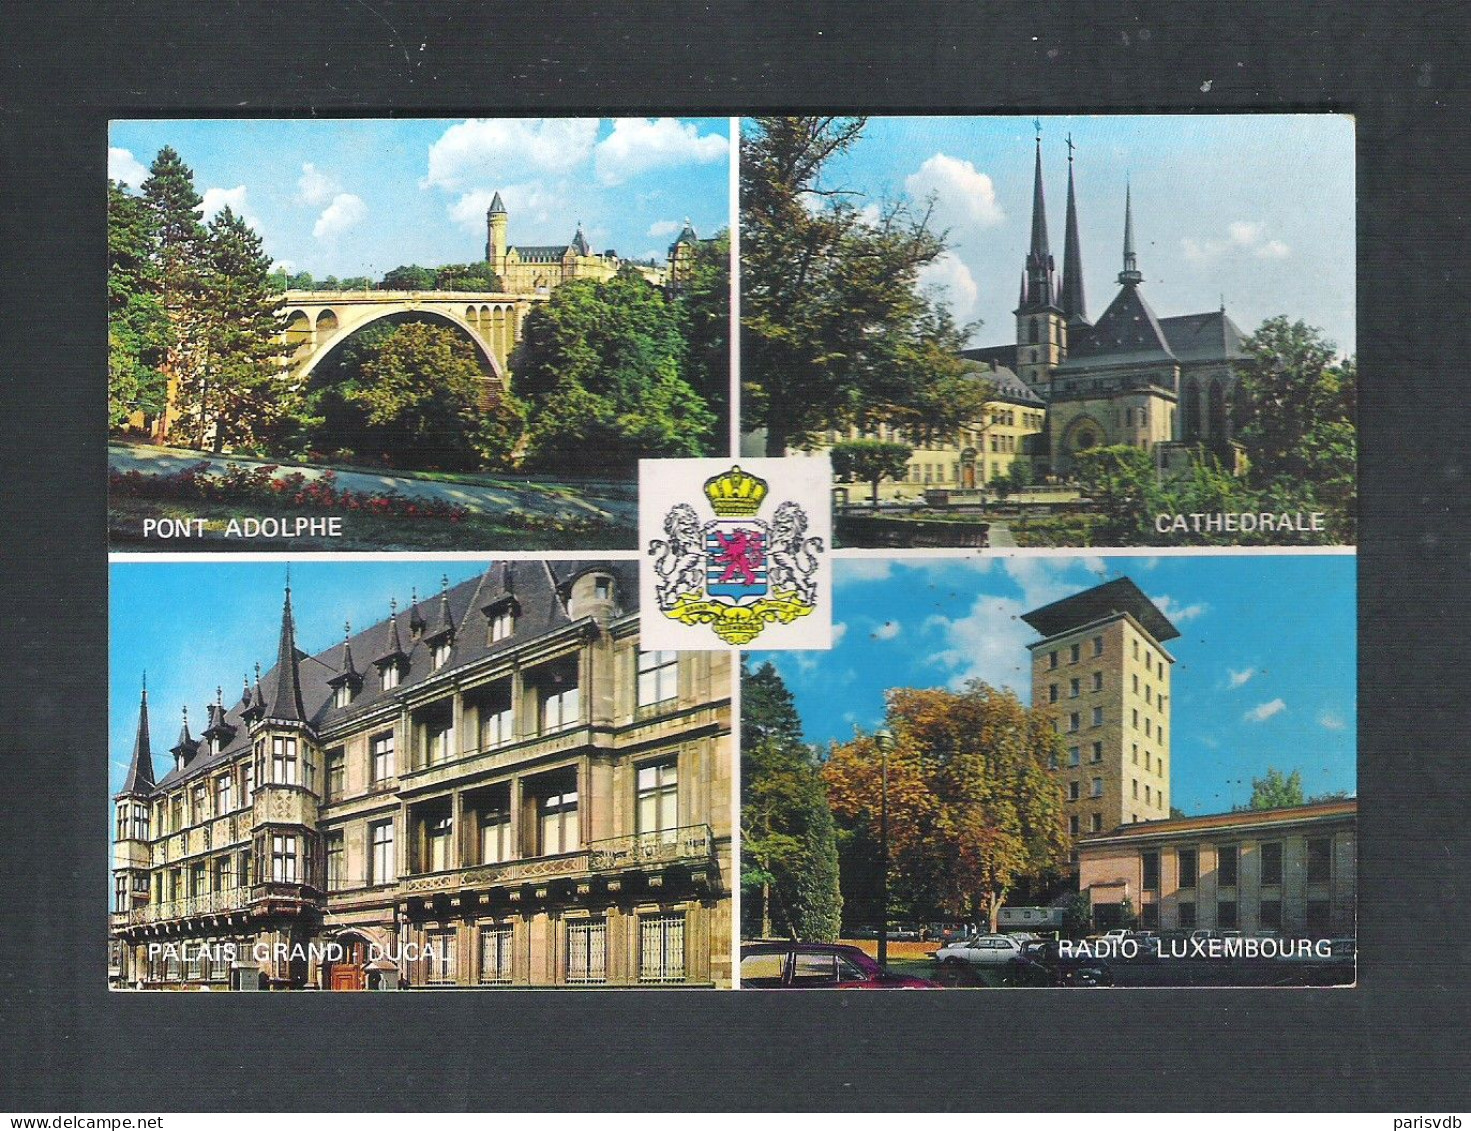 LUXEMBOURG - LUXEMBOURG  - 4  ZICHTEN  (L 141) - Luxembourg - Ville